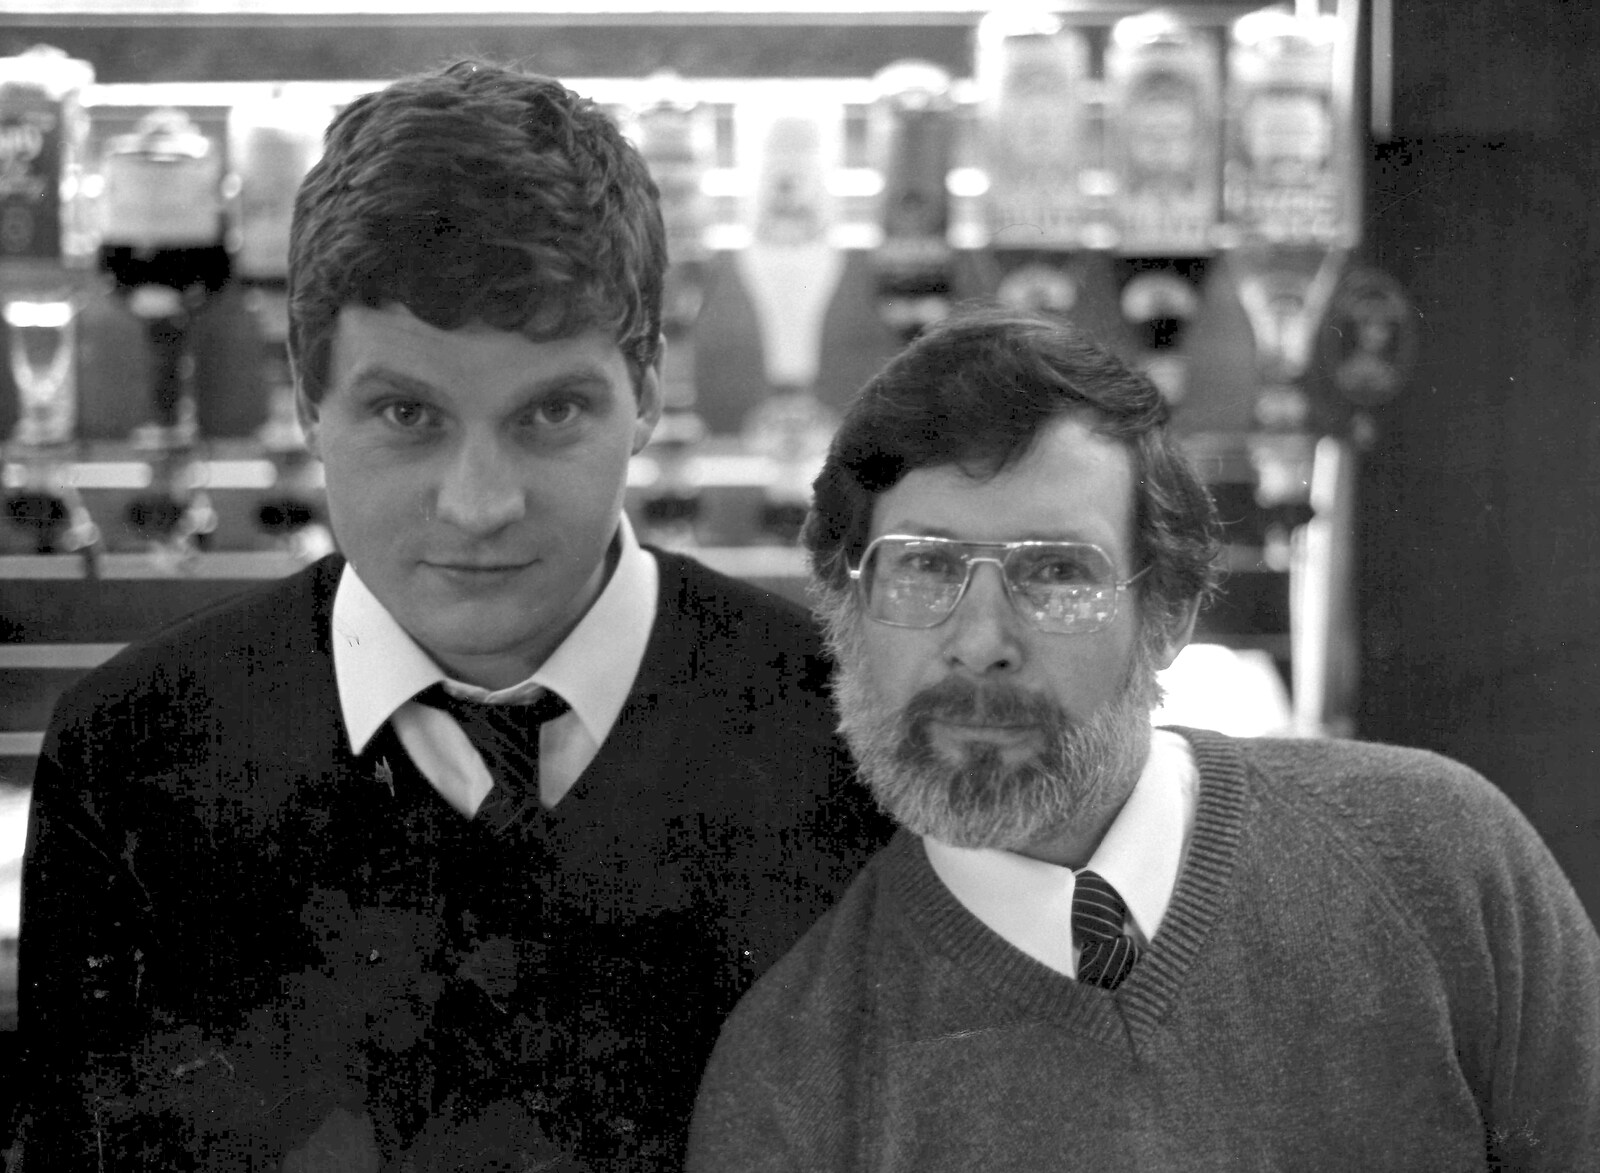 Steve and Brian behind the SU bar from Uni: The Second Year in Black and White, Plymouth Polytehnic, Devon - 8th March 1987